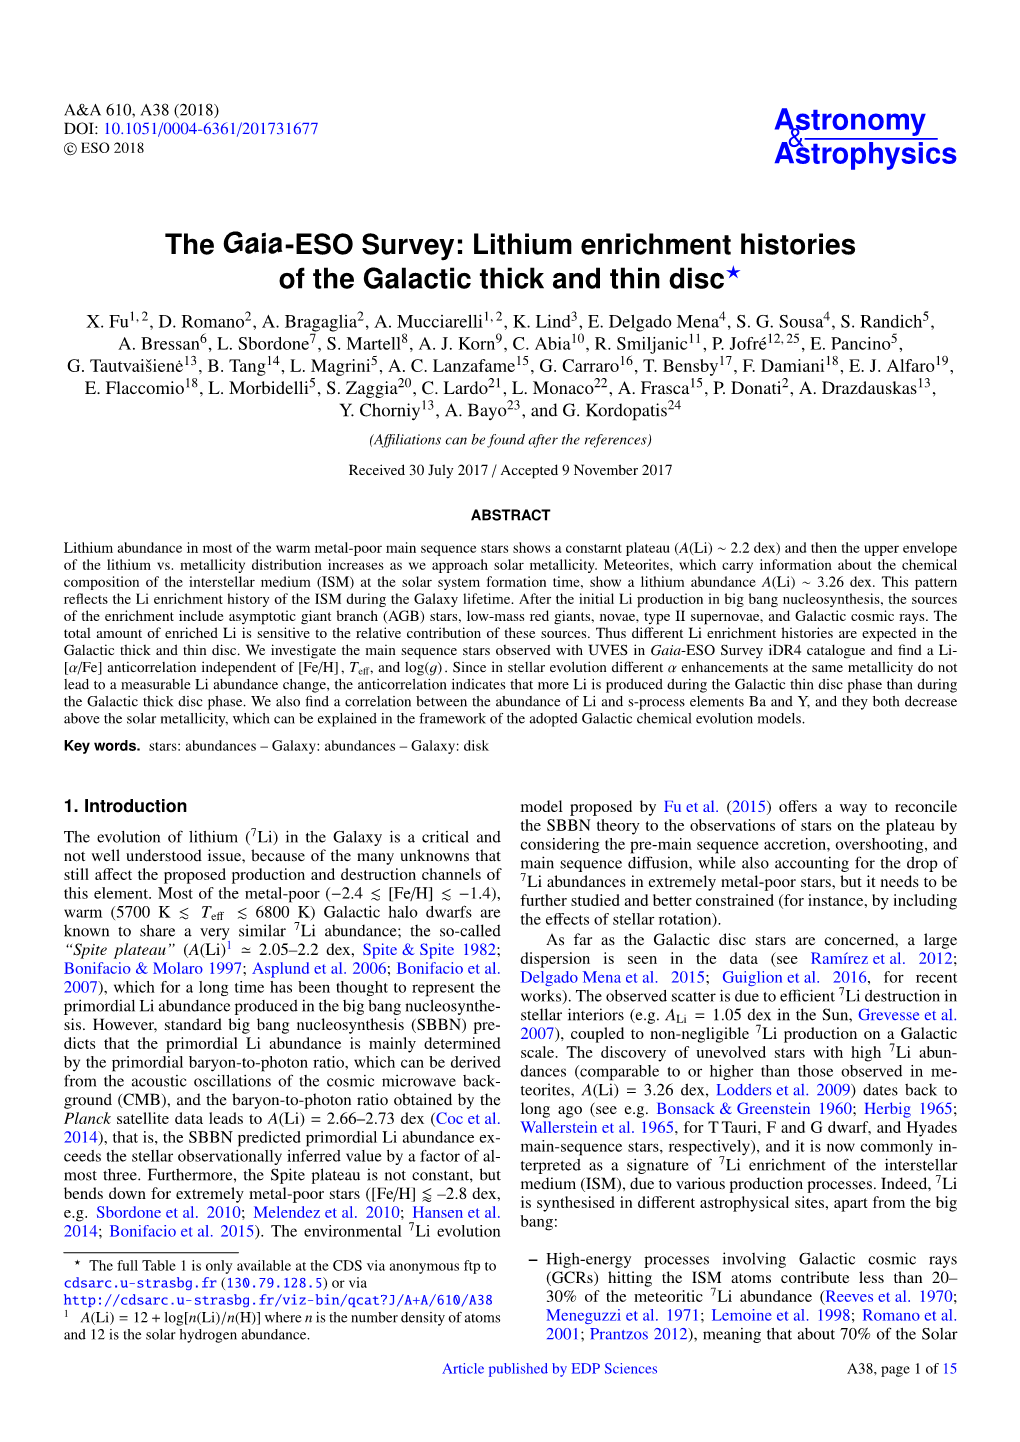 The Gaia-ESO Survey: Lithium Enrichment Histories of the Galactic Thick and Thin Disc? X